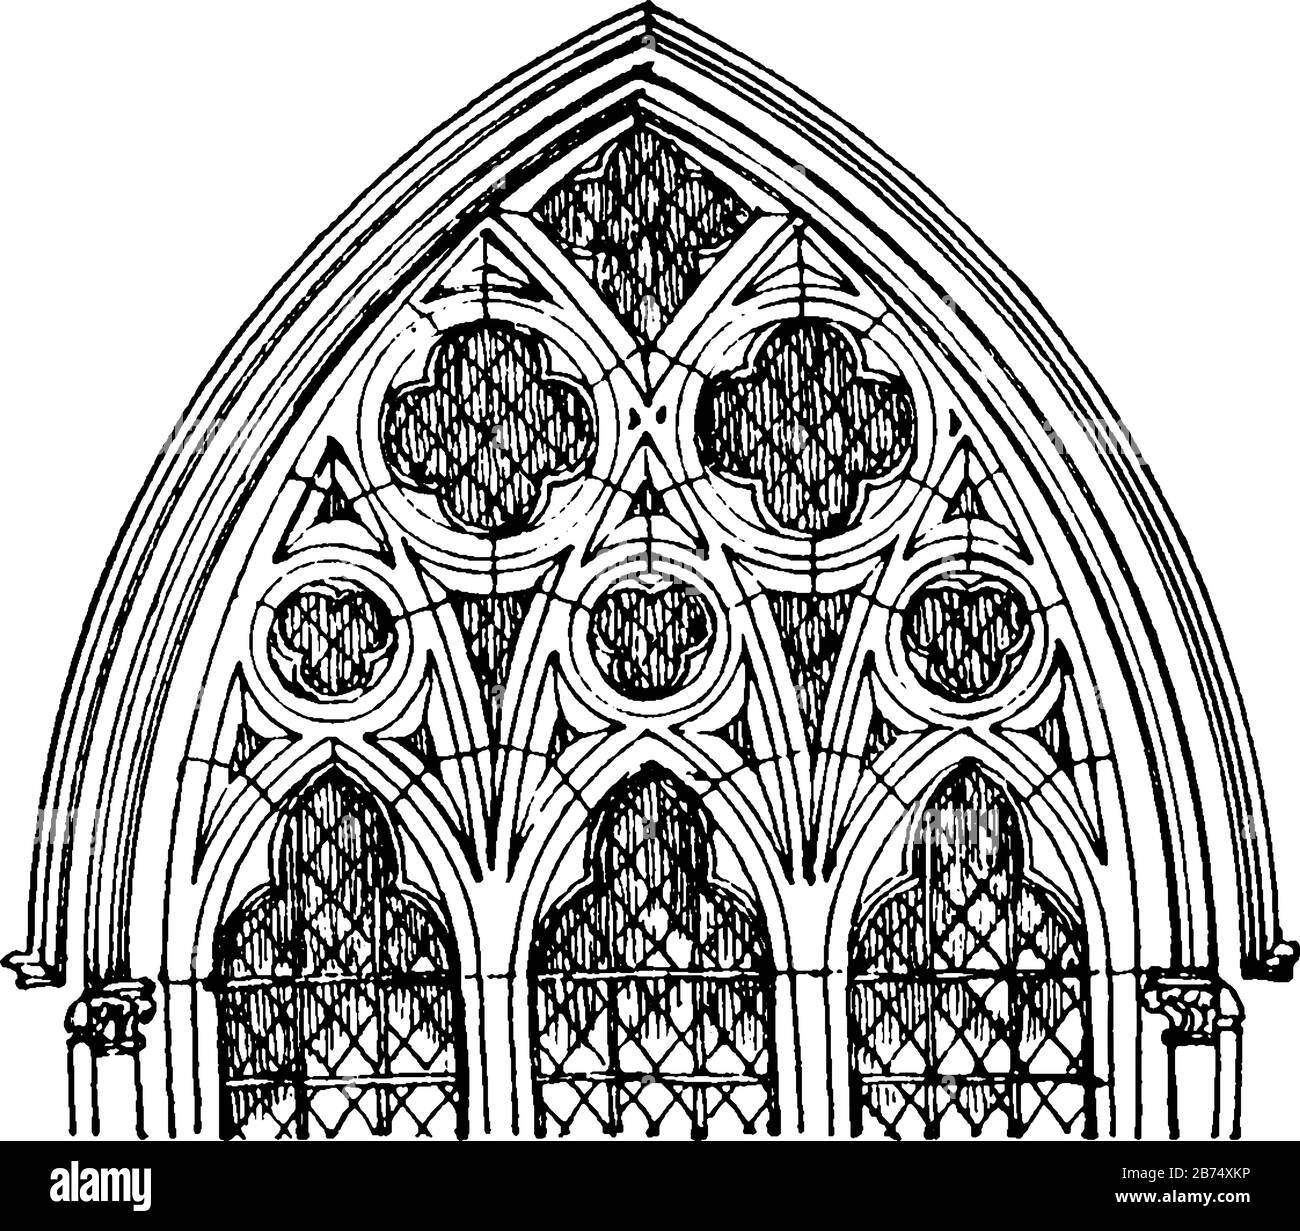 Tracery is from Meopham Church, wide and with a simple round-headed, pointed-arch Gothic window, vintage line drawing or engraving illustration. Stock Vector